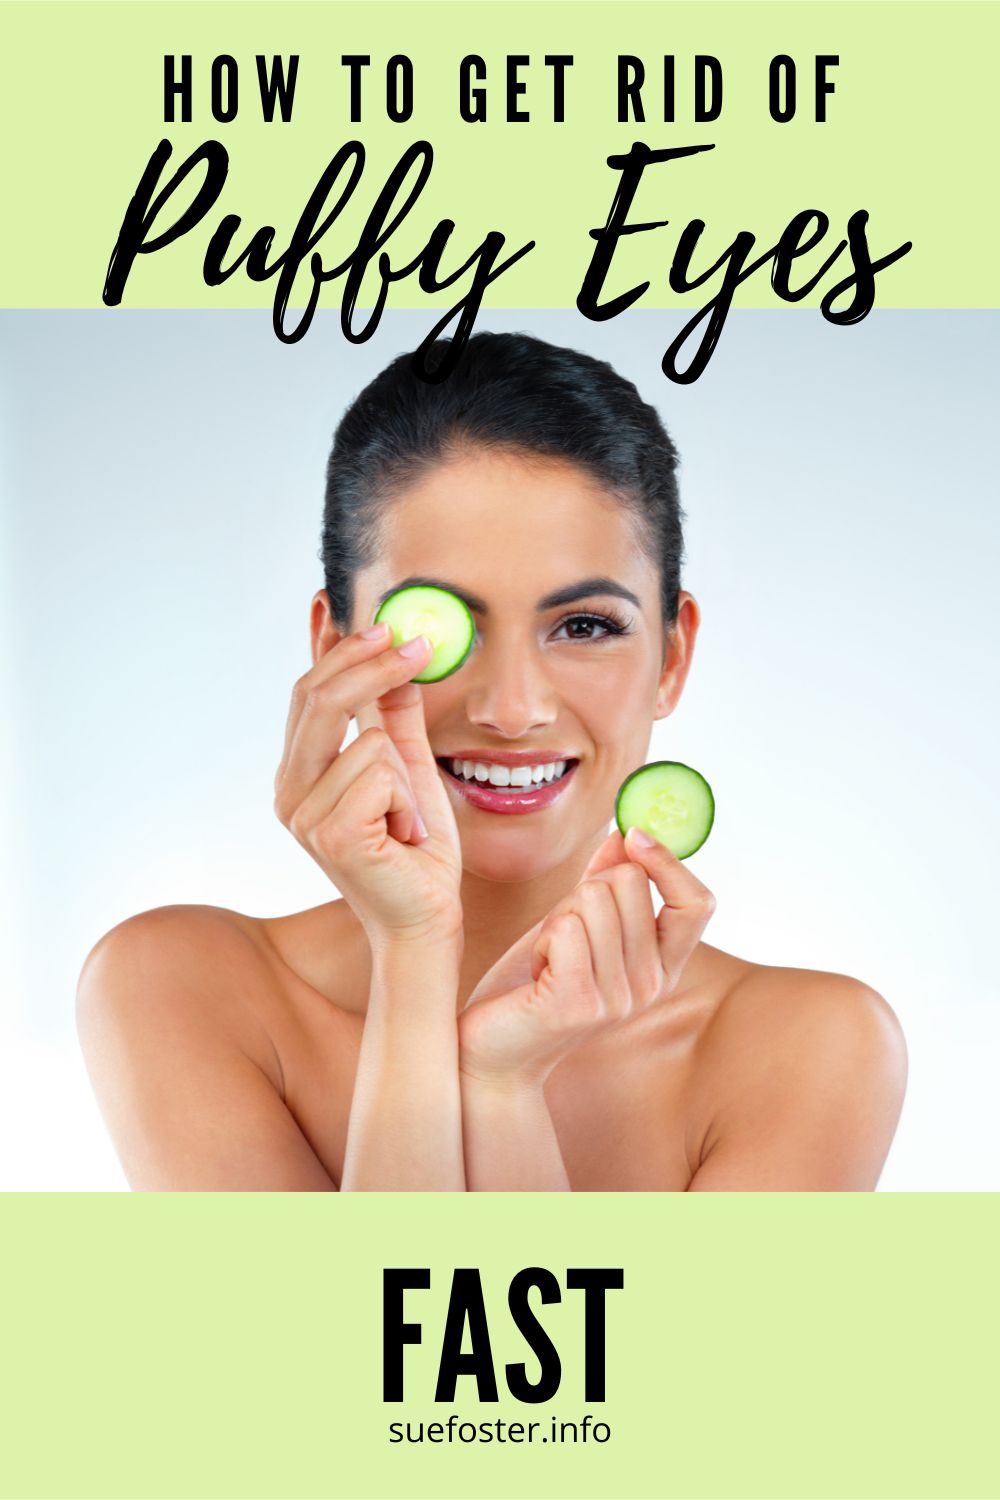 Let's look at a few ideas that help combat puffy eye bags without resorting to surgery!